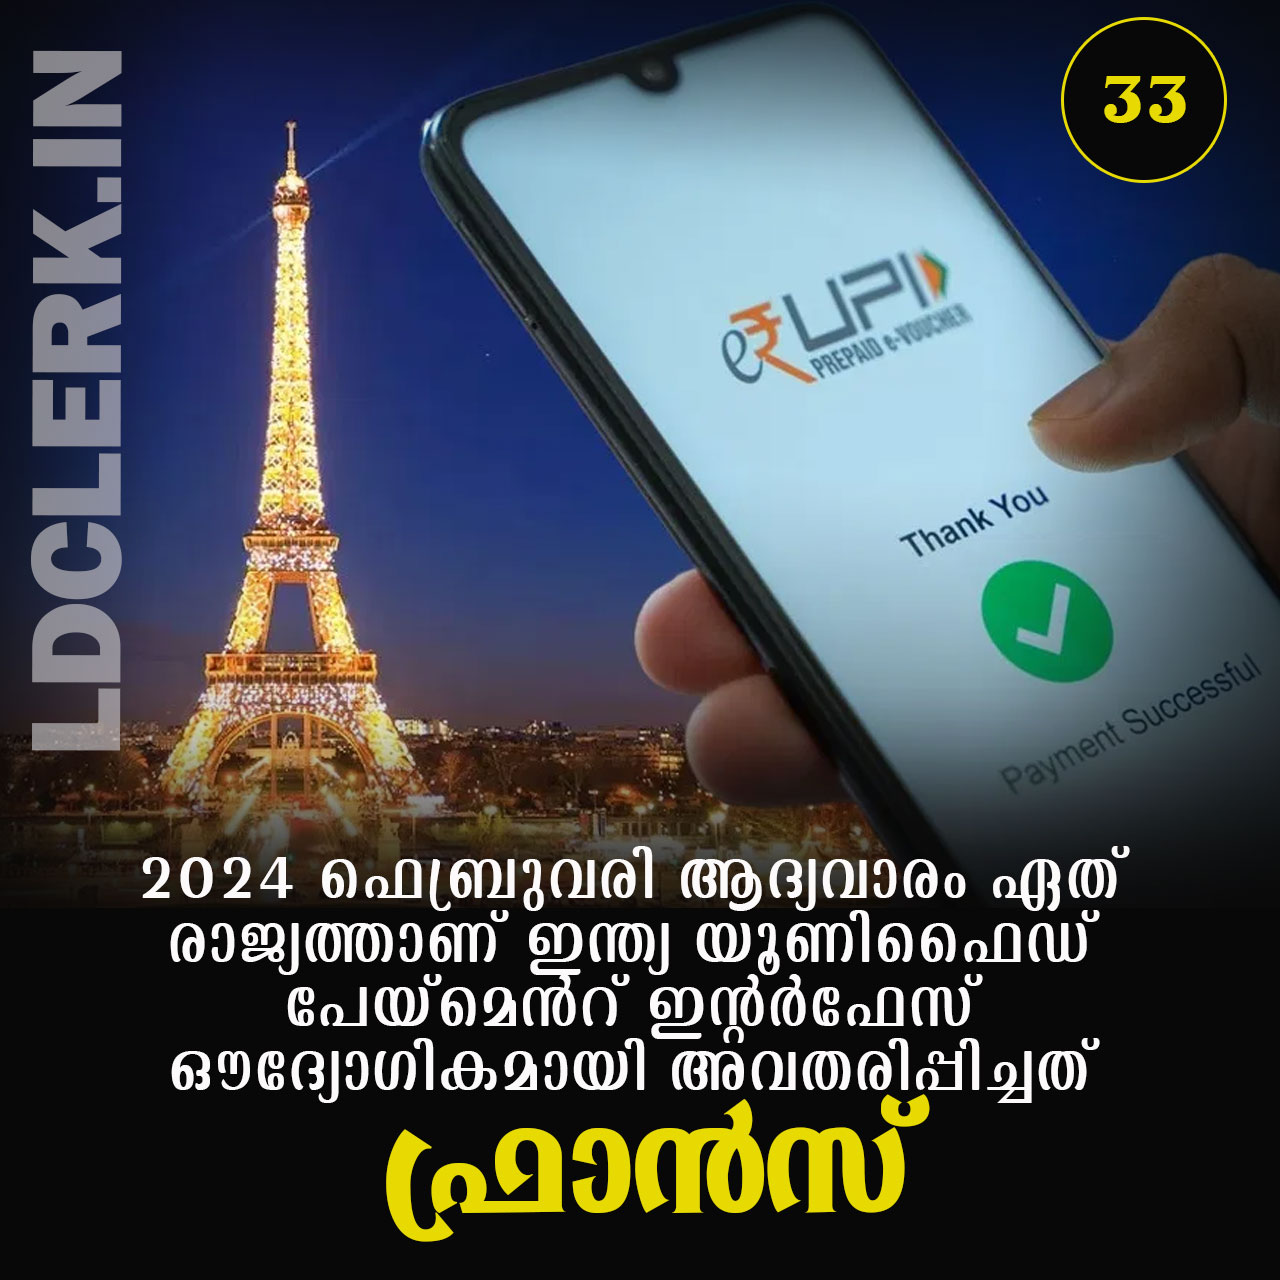 India has officially introduced UPI